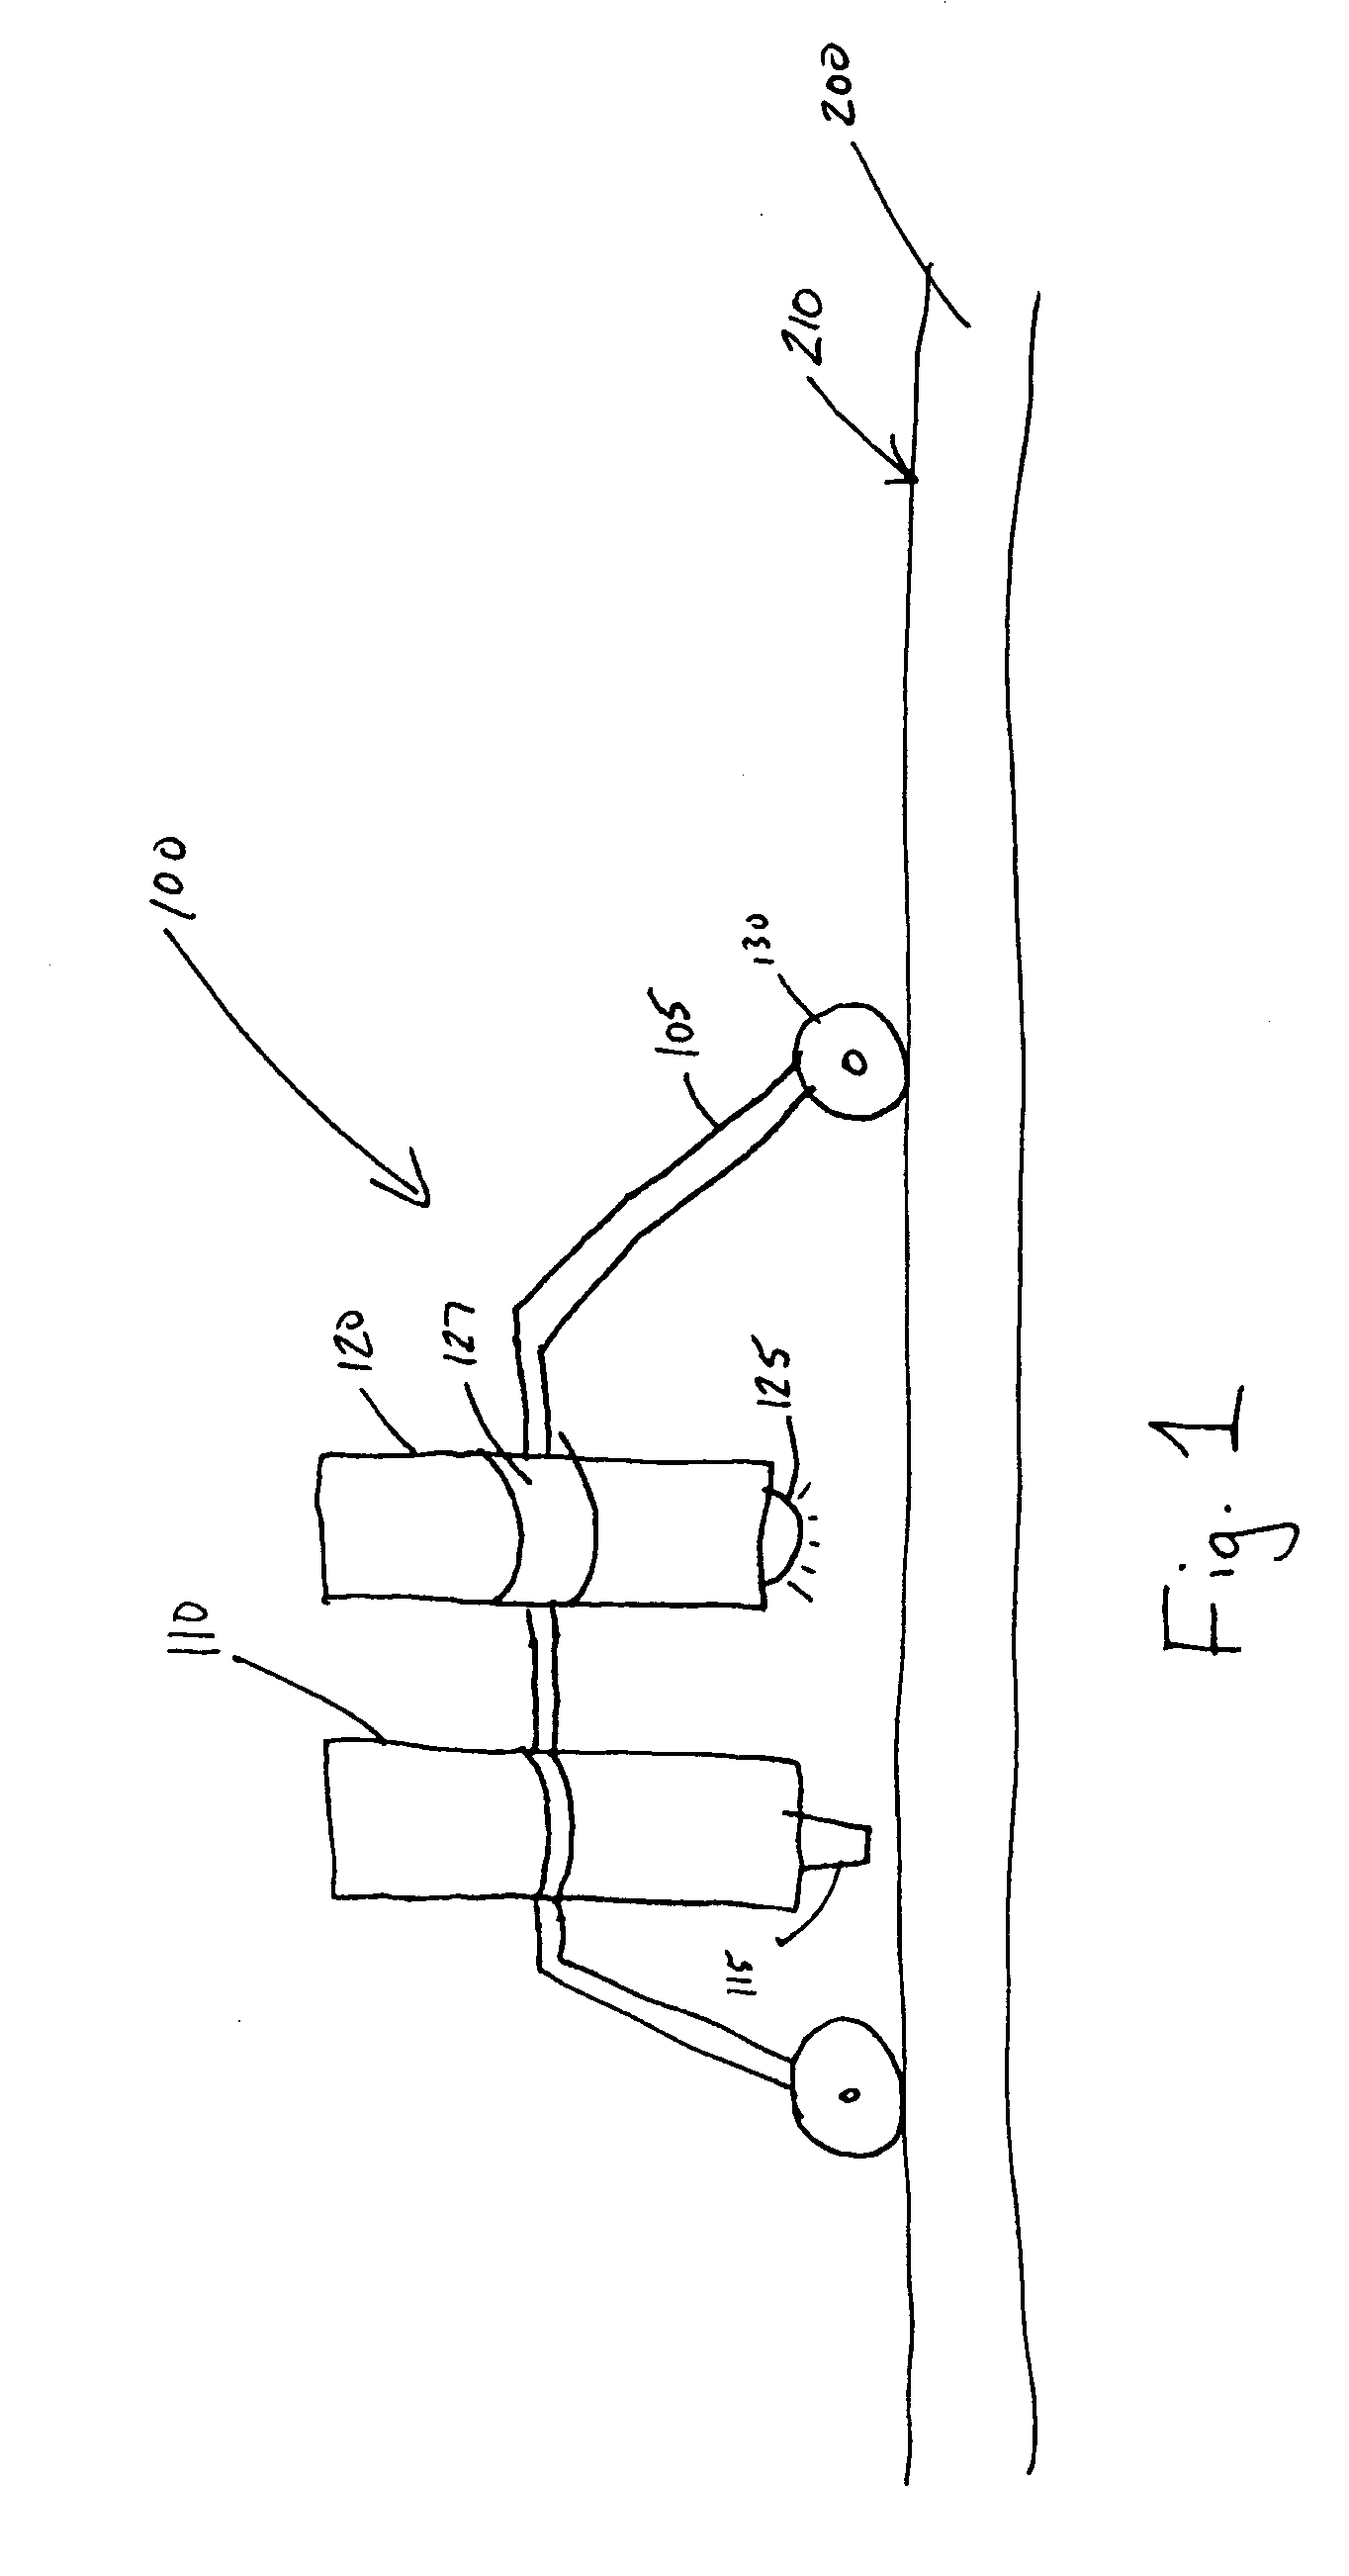 UVV curable coating compositions and method for coating flooring and other substrates with same